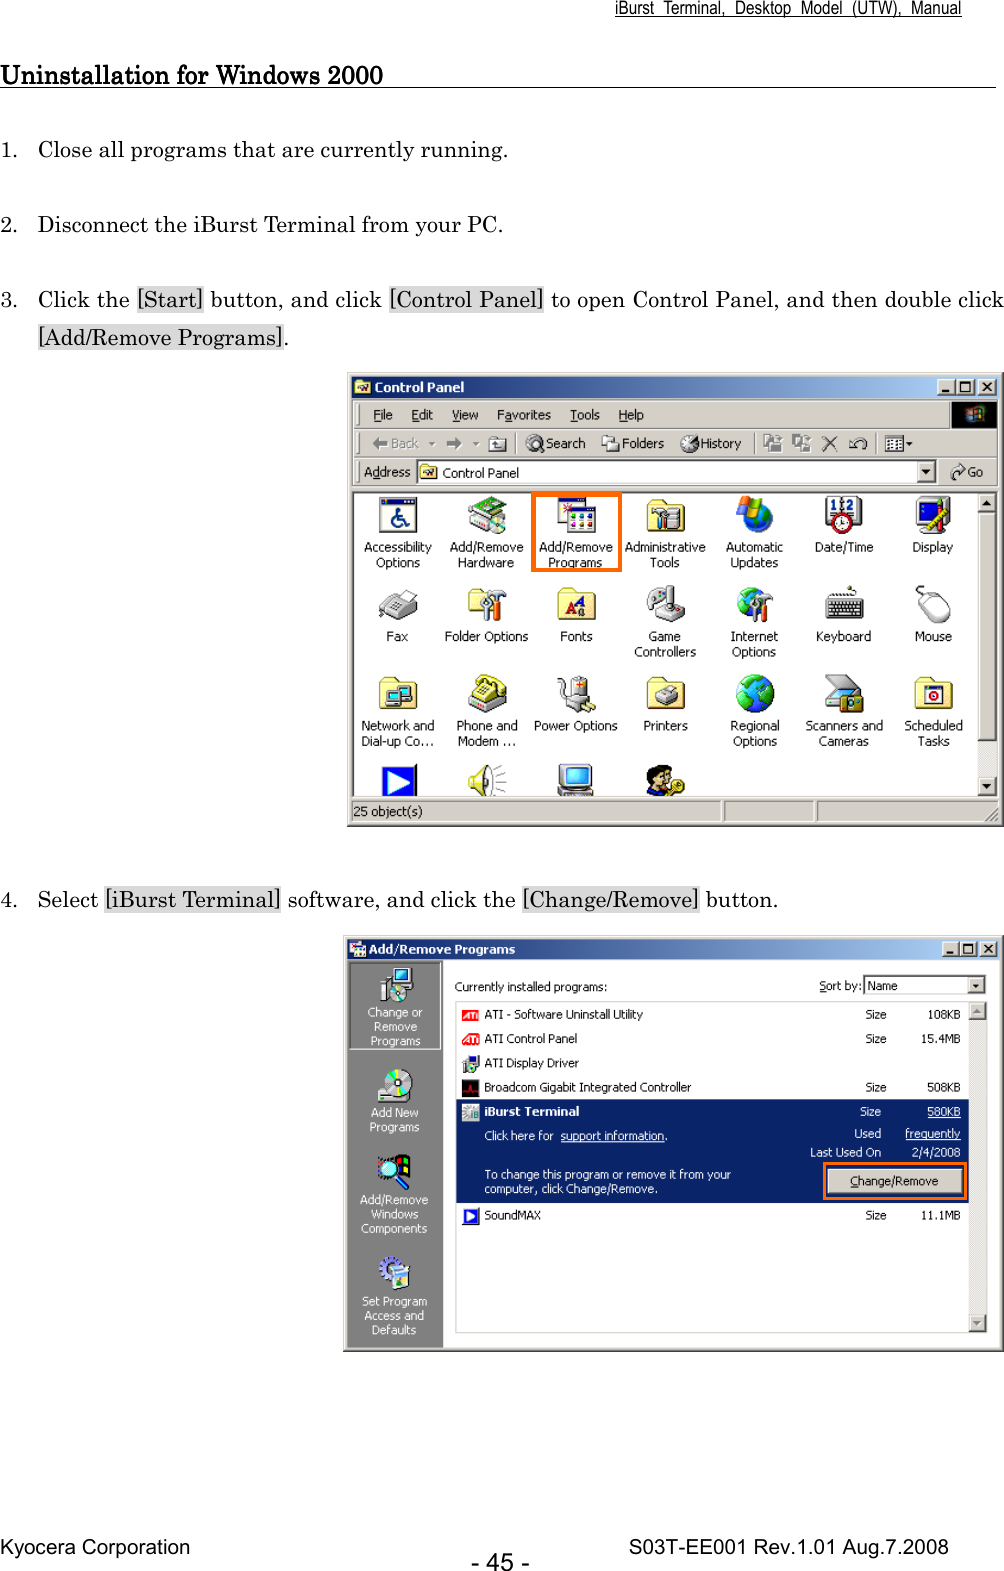 iBurst  Terminal,  Desktop  Model  (UTW),  Manual Kyocera Corporation                                                                                    S03T-EE001 Rev.1.01 Aug.7.2008 - 45 - Uninstallation for Windows 2000                                                                   Uninstallation for Windows 2000                                                                   Uninstallation for Windows 2000                                                                   Uninstallation for Windows 2000                                                                                                                                           1. Close all programs that are currently running.  2. Disconnect the iBurst Terminal from your PC.  3. Click the [Start] button, and click [Control Panel] to open Control Panel, and then double click [Add/Remove Programs].     4. Select [iBurst Terminal] software, and click the [Change/Remove] button.   